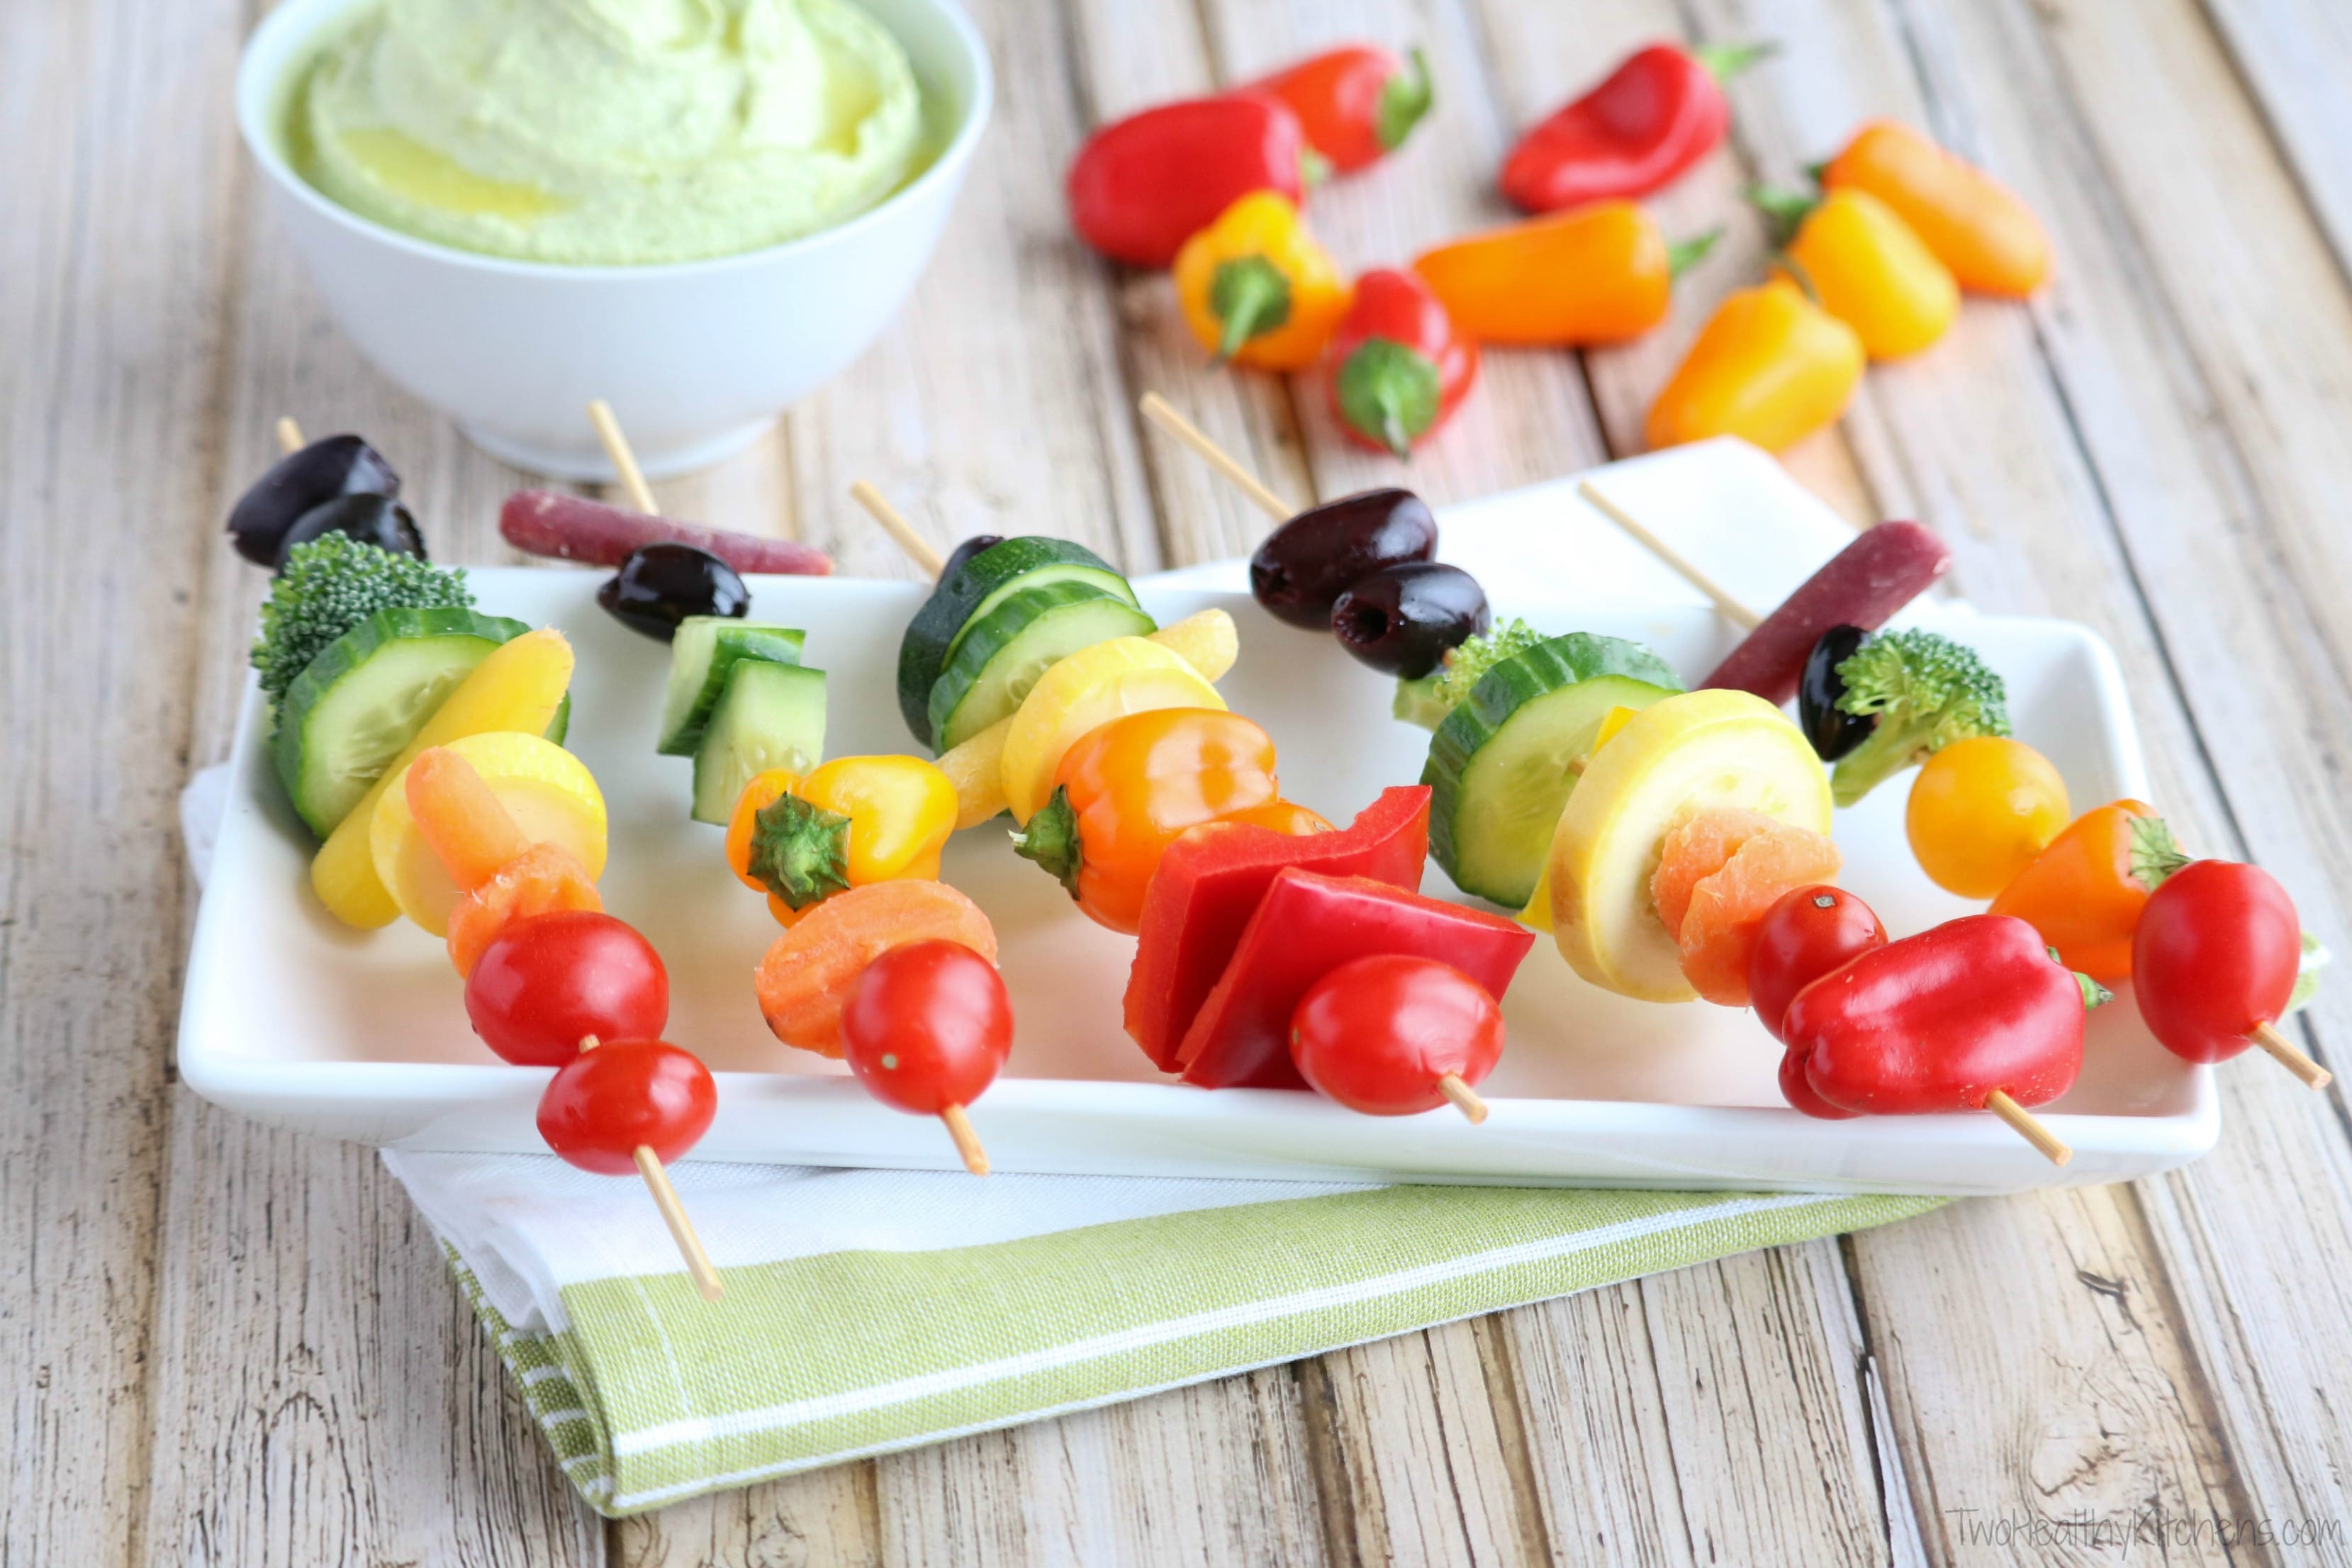 Side view of kabobs with skewers across serving platter, dip and extra vegetables in background.